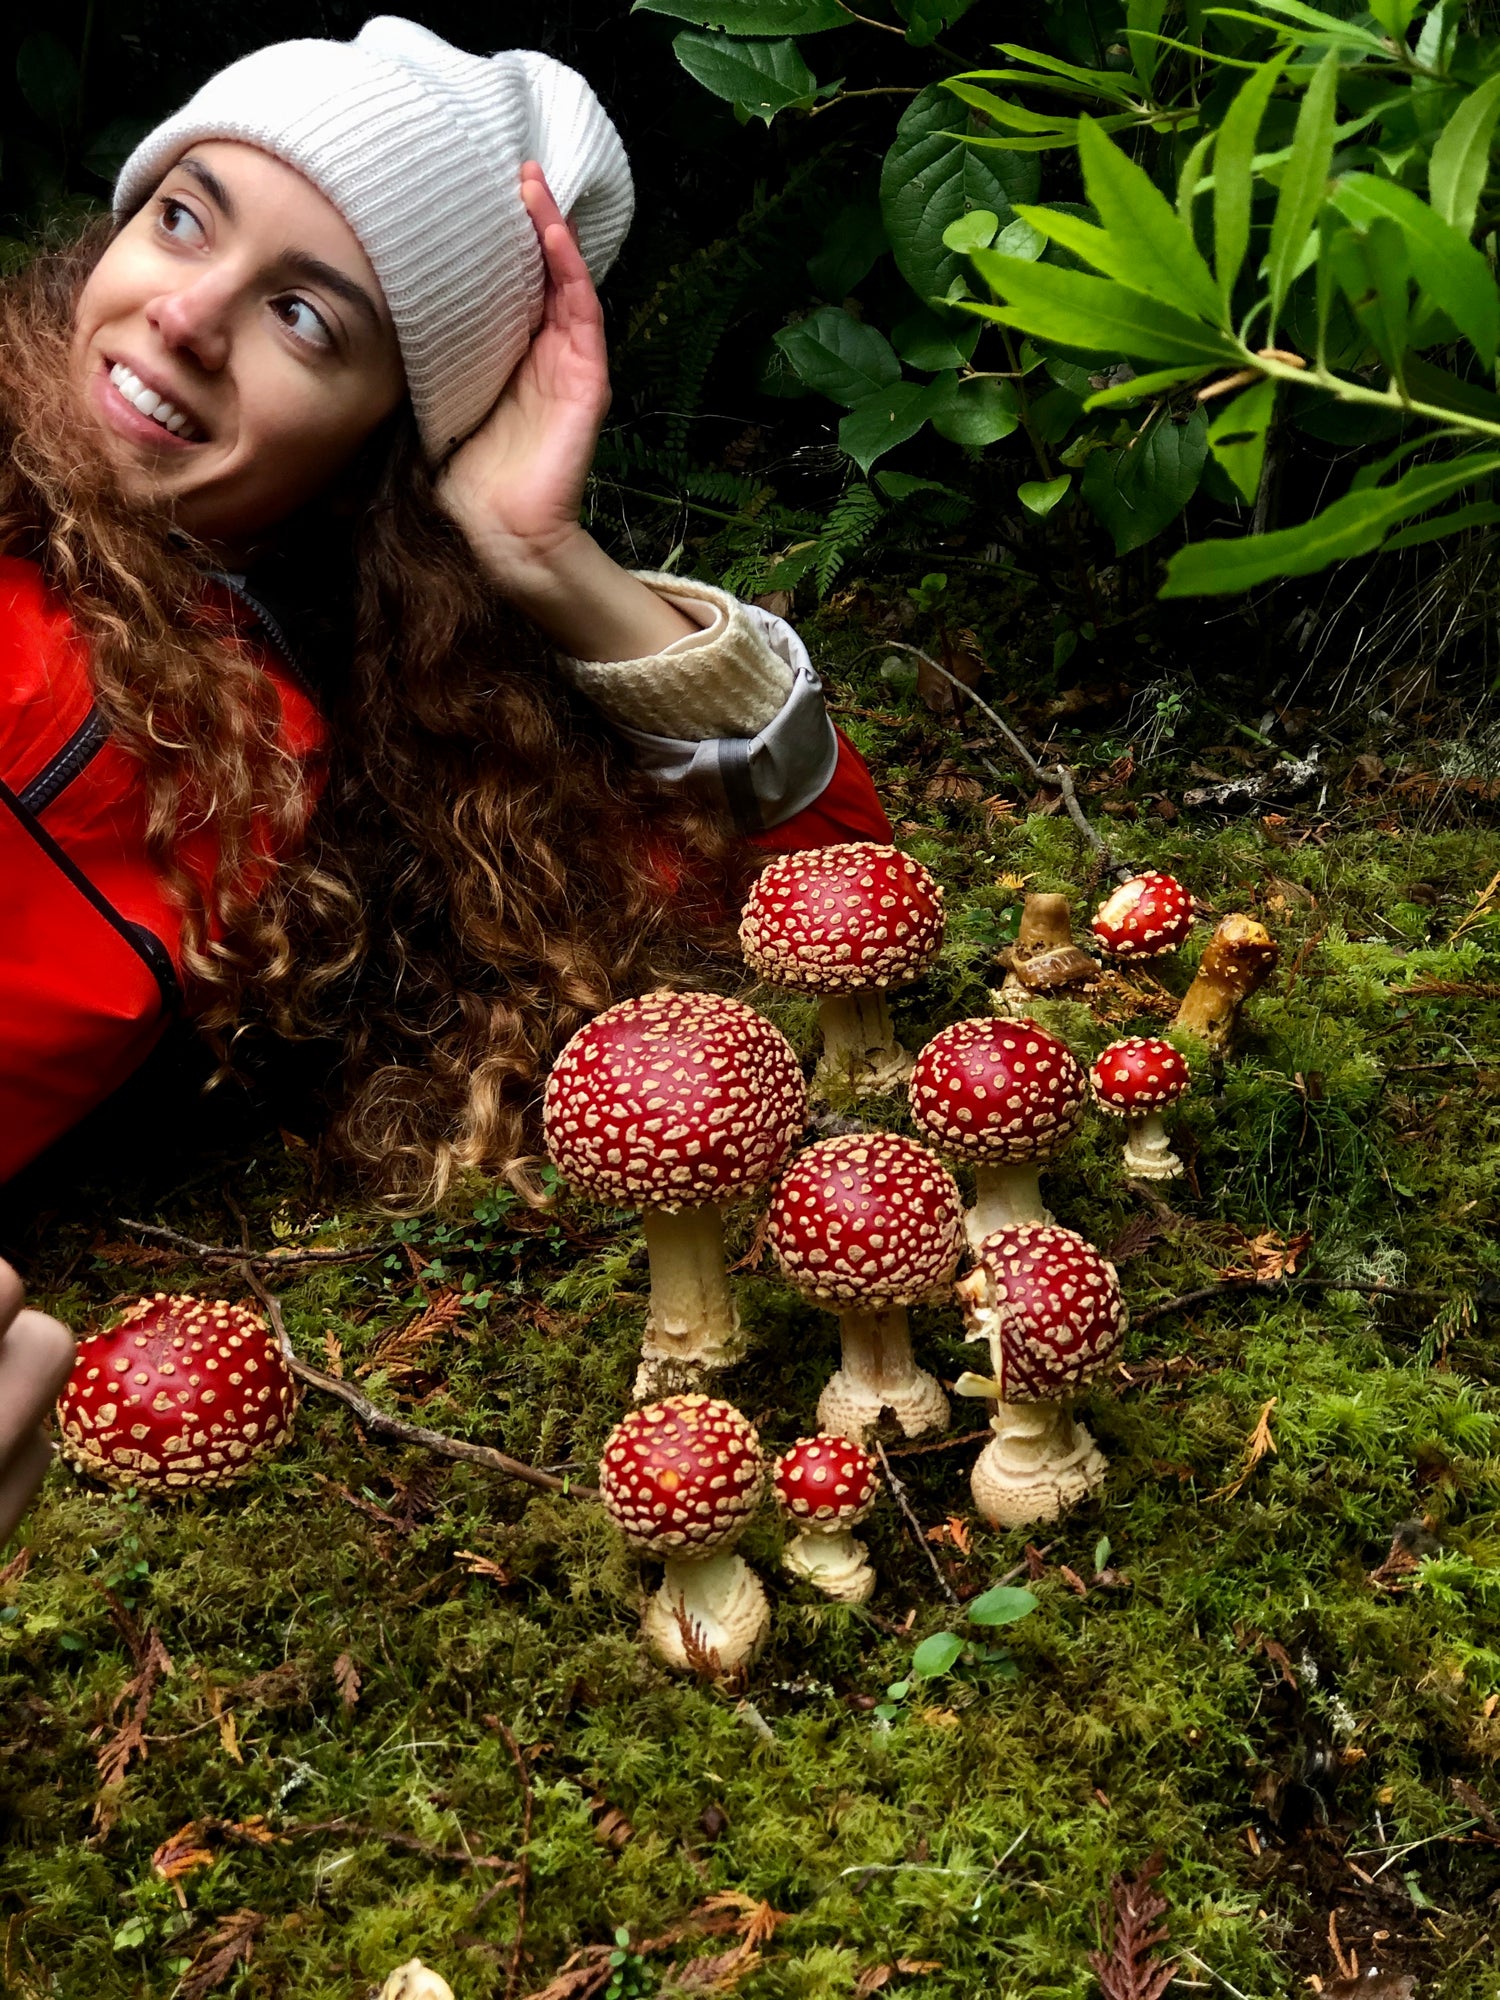 Tonya Papanikolov, founder of Rainbo laying on the grass with a community of 10 red amanita muscaria mushrooms